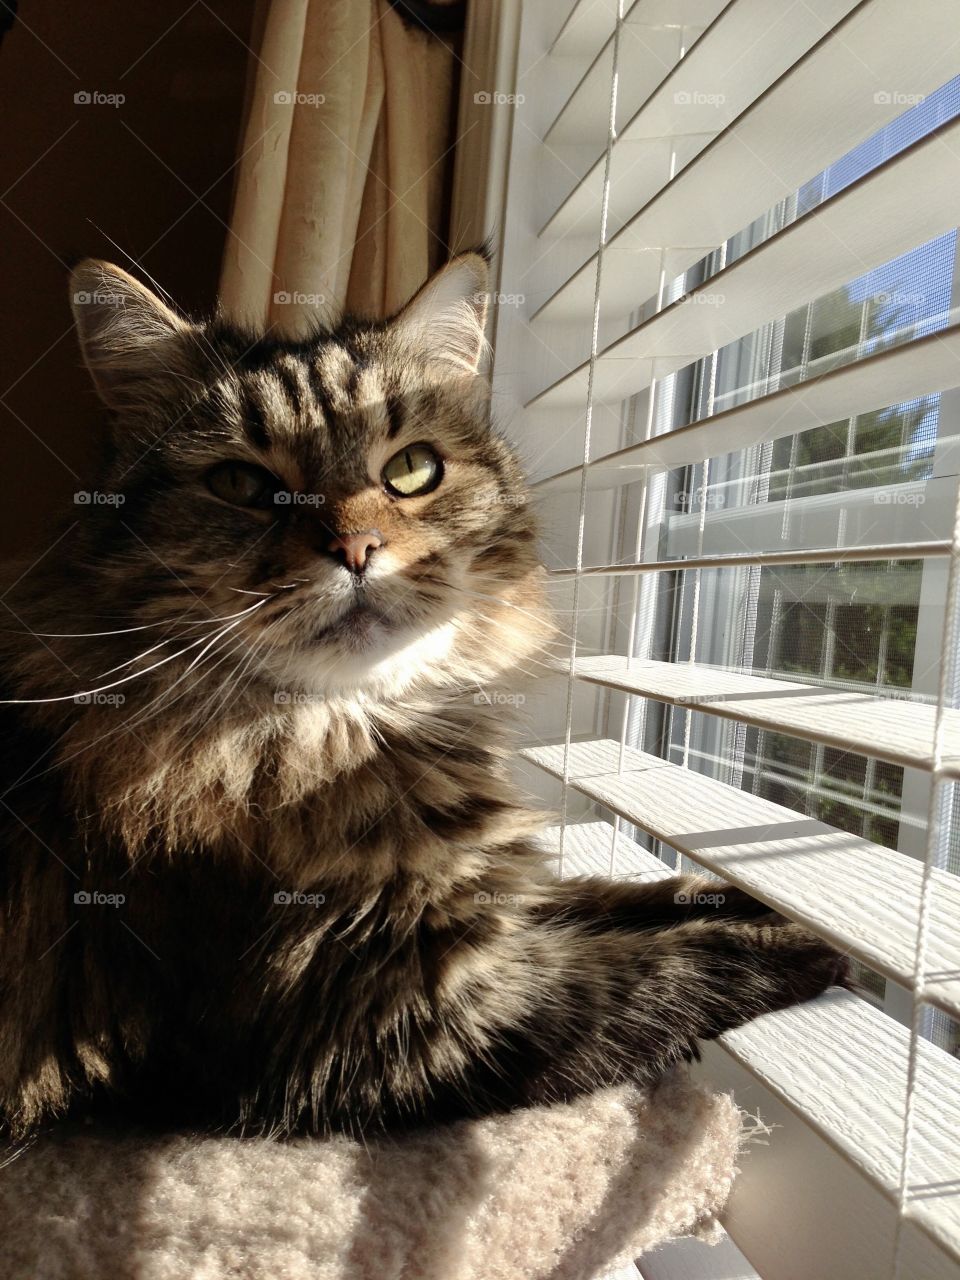 Long-haired feline Maine coon cat sitting on a windowsill with natural light coming through window blinds shadows and light on the face and eyes